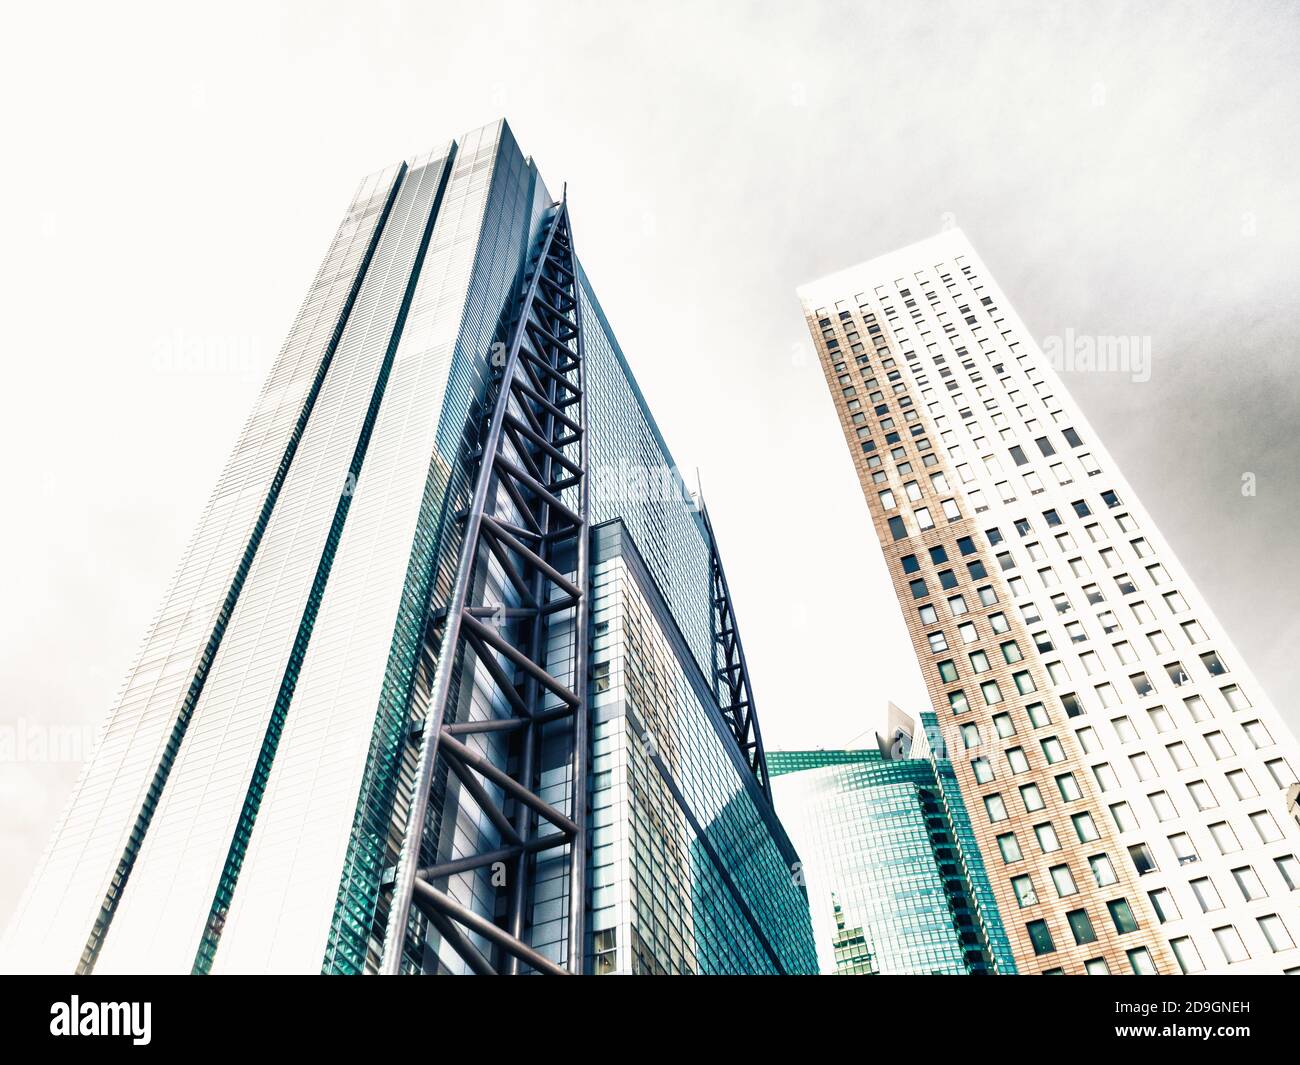 Low angle shot of office buildings with modern architecture Stock Photo